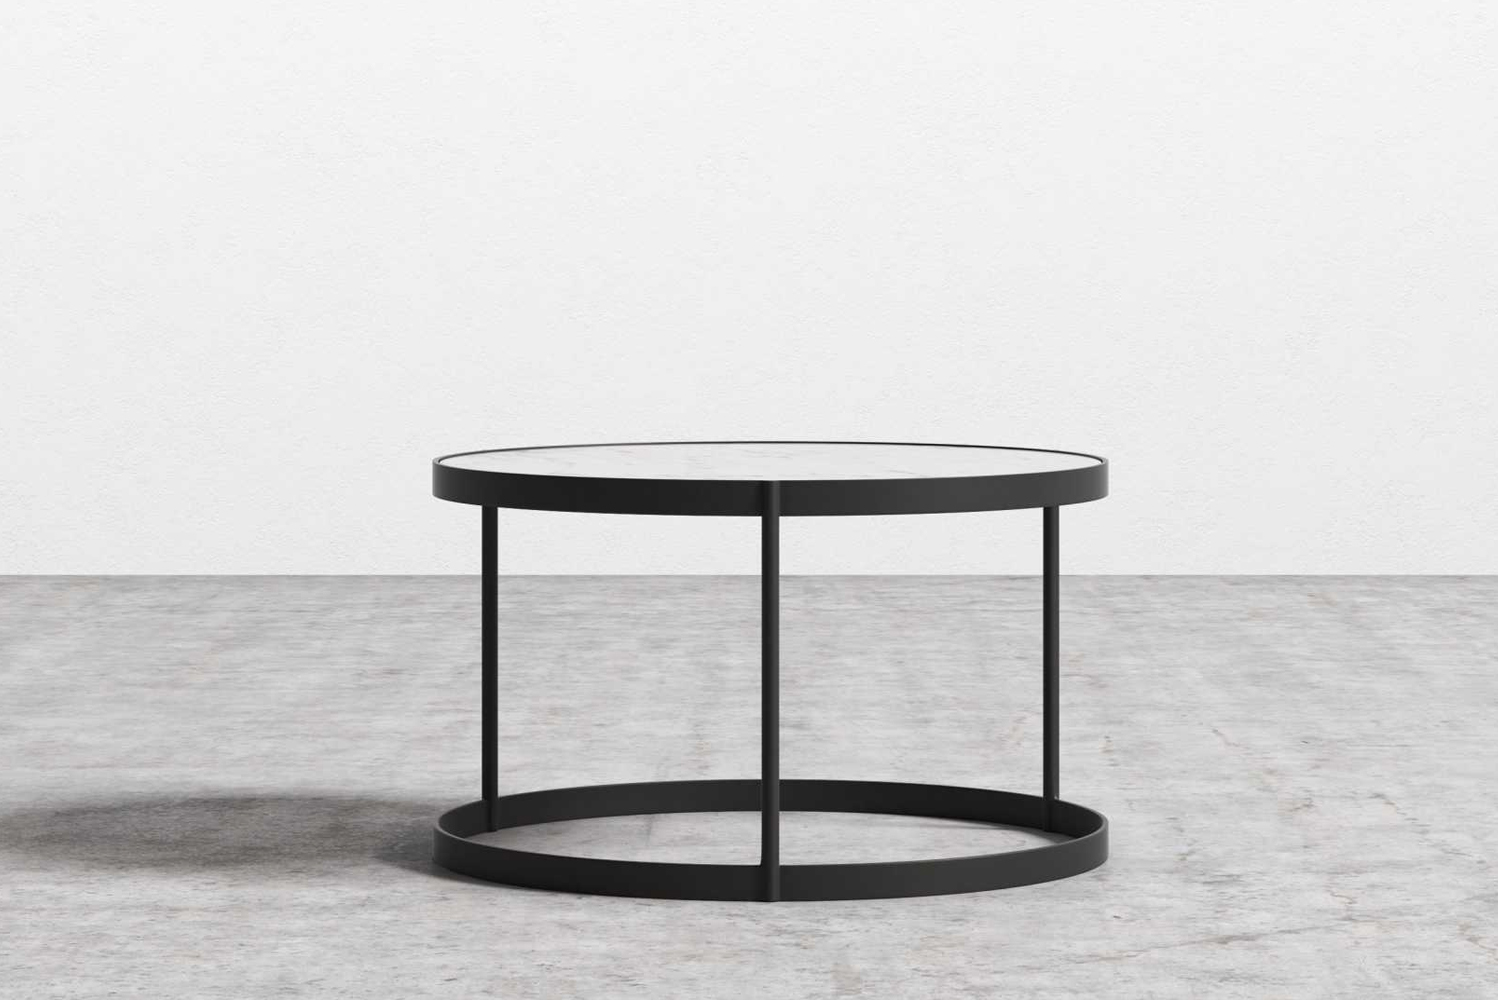 Rove Concepts launched the Malin coffee table 